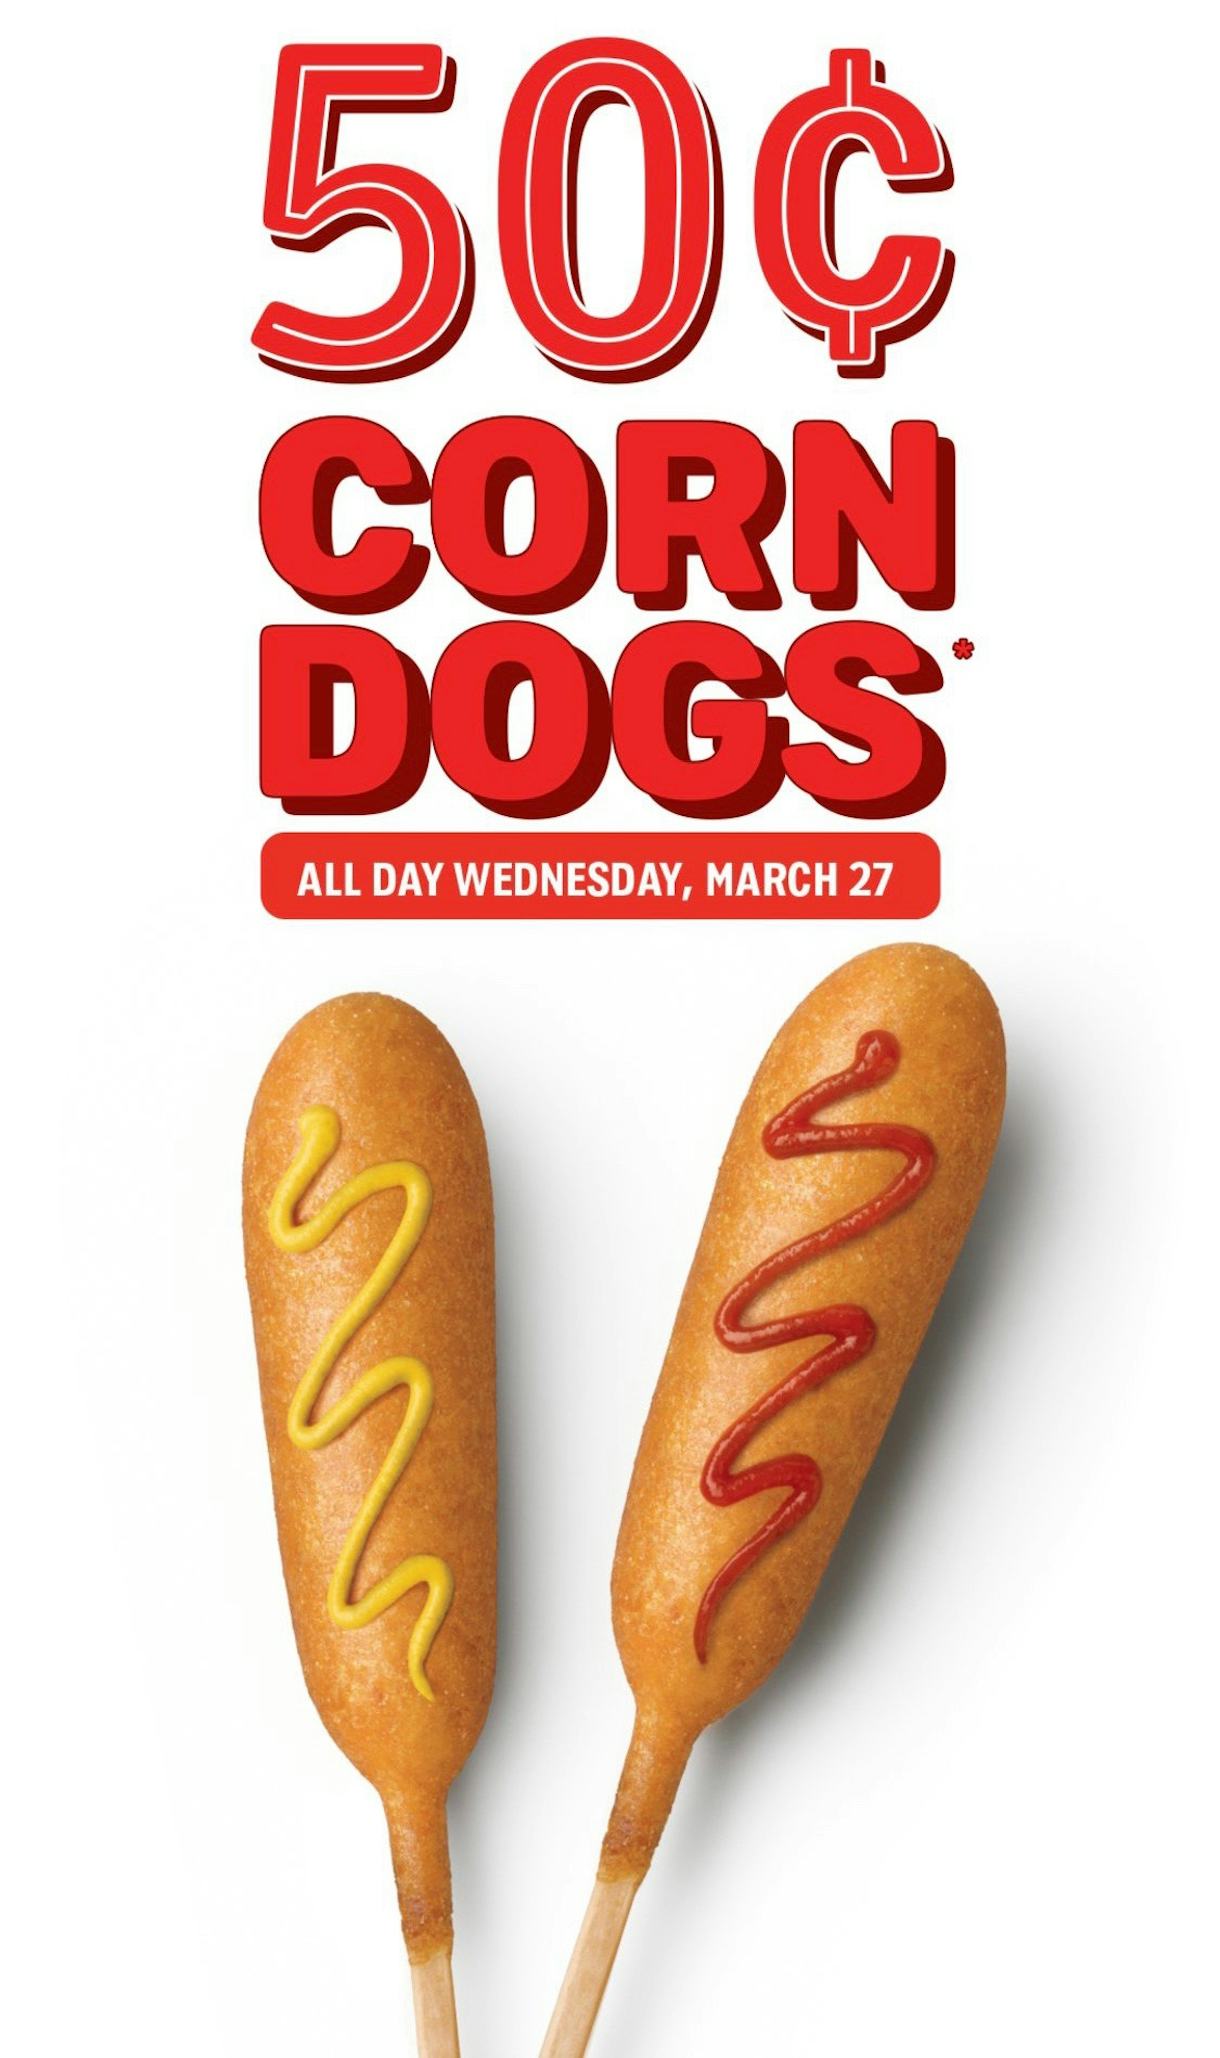 Sonic’s 50Cent Corn Dog Deal For March 2019 Is Available For 1 Day Only